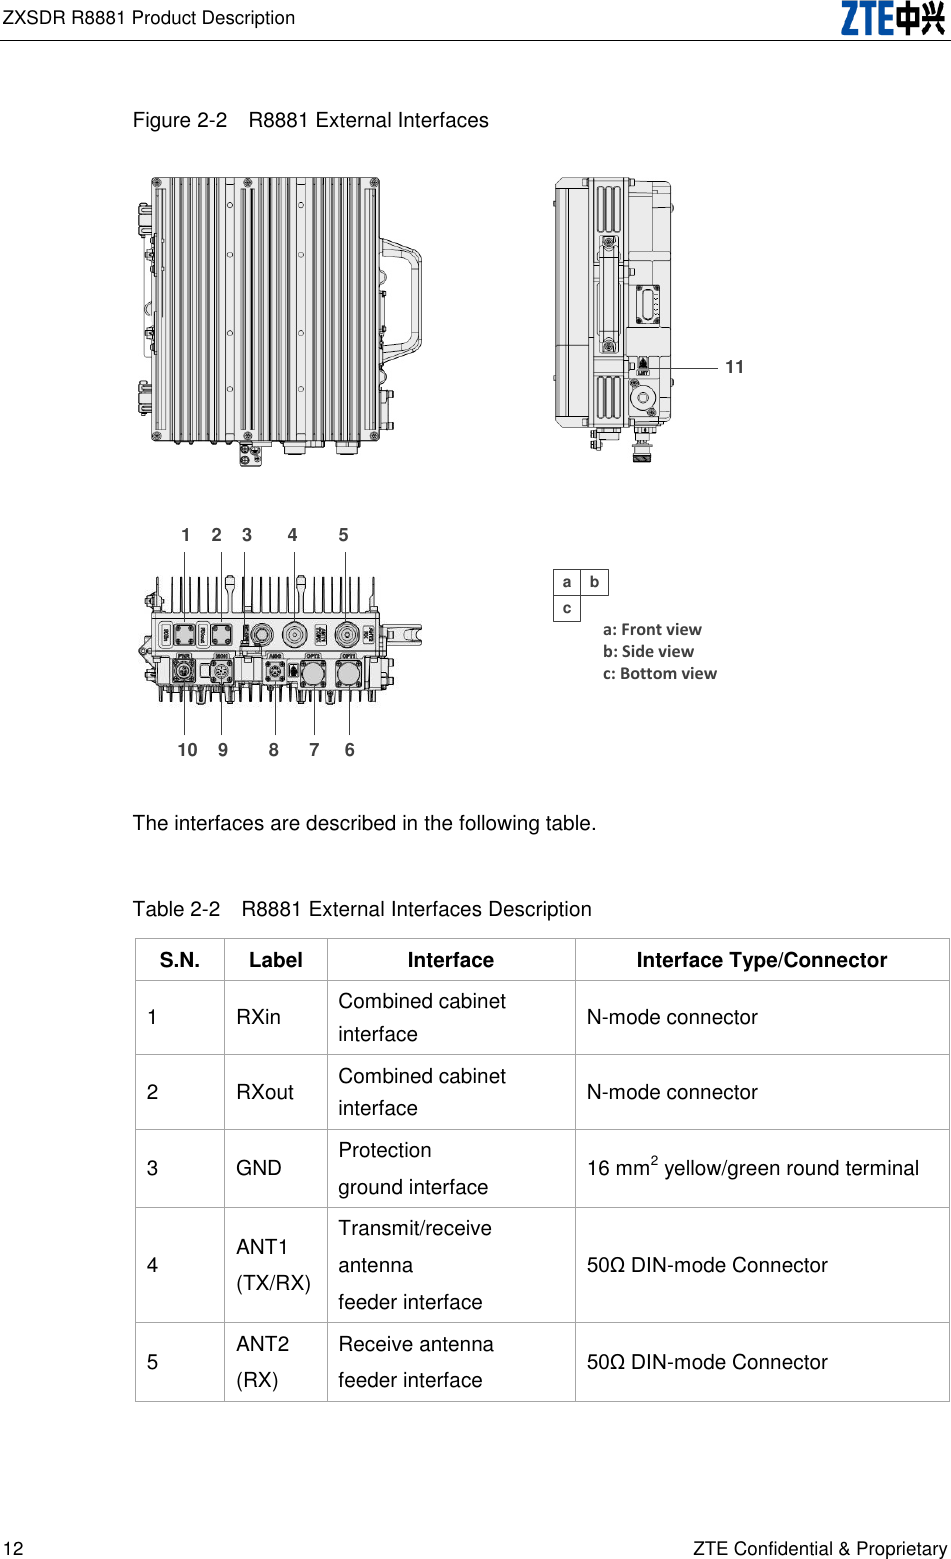 ZXSDR R8881 Product Description   12 ZTE Confidential &amp; Proprietary Figure 2-2  R8881 External Interfaces  The interfaces are described in the following table. Table 2-2  R8881 External Interfaces Description S.N. Label Interface Interface Type/Connector 1 RXin Combined cabinet interface N-mode connector 2 RXout Combined cabinet interface N-mode connector 3 GND Protection ground interface 16 mm2 yellow/green round terminal 4 ANT1 (TX/RX) Transmit/receive antenna feeder interface 50Ω DIN-mode Connector 5 ANT2 (RX) Receive antenna feeder interface 50Ω DIN-mode Connector 1    2    3       4        510    9        8      7     6a bca: Front viewb: Side view c: Bottom view11